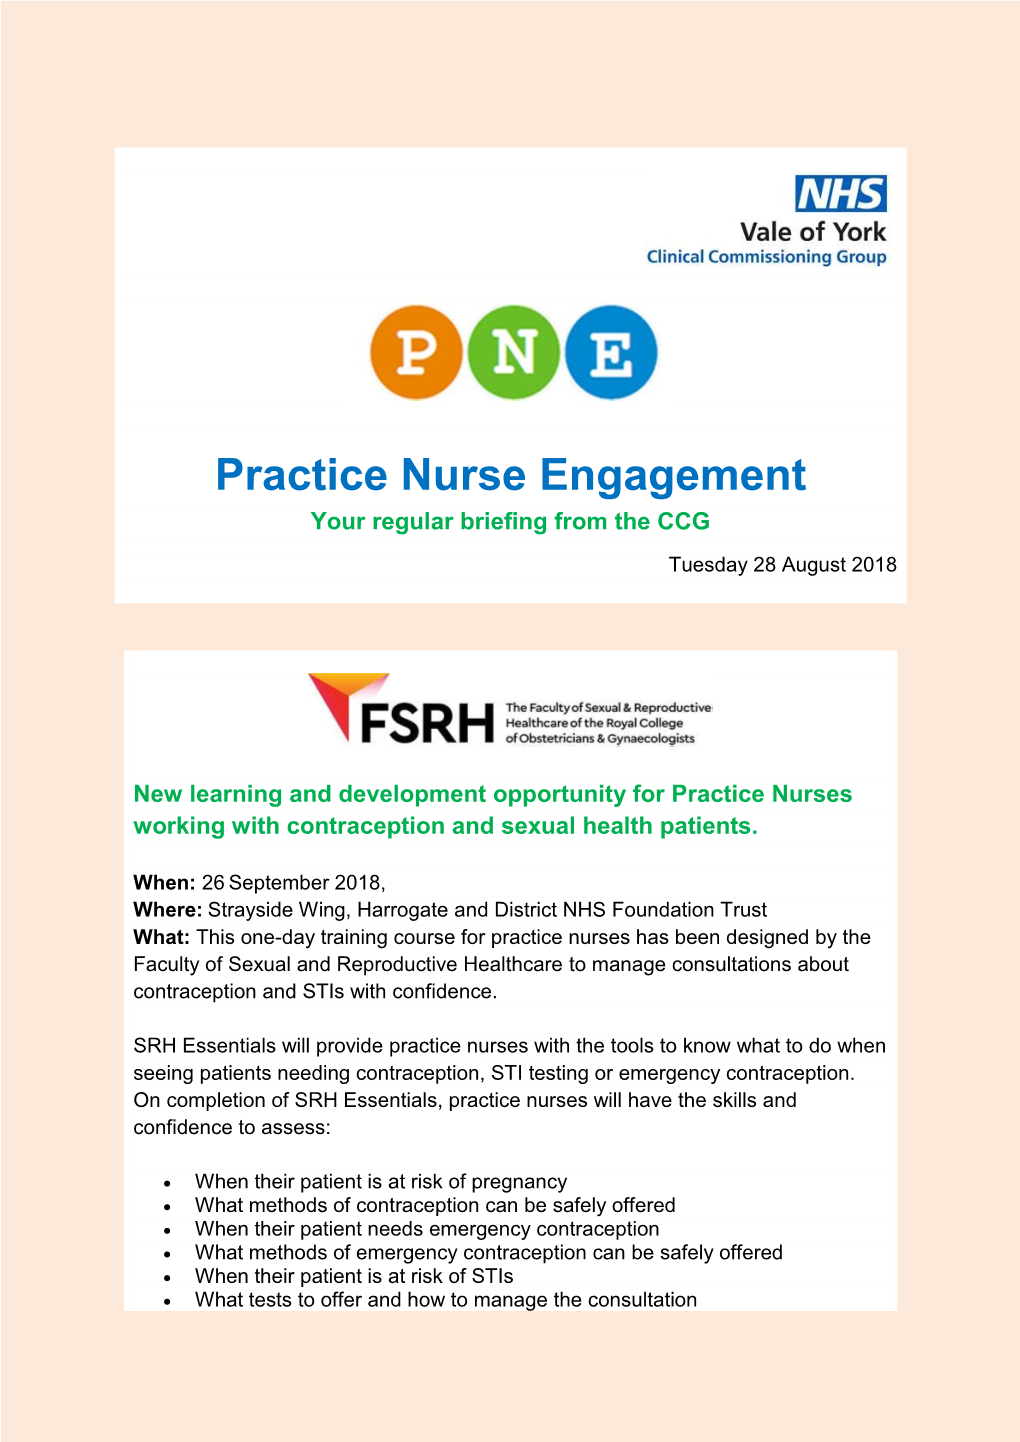 Practice Nurse Engagement Your Regular Briefing from the CCG